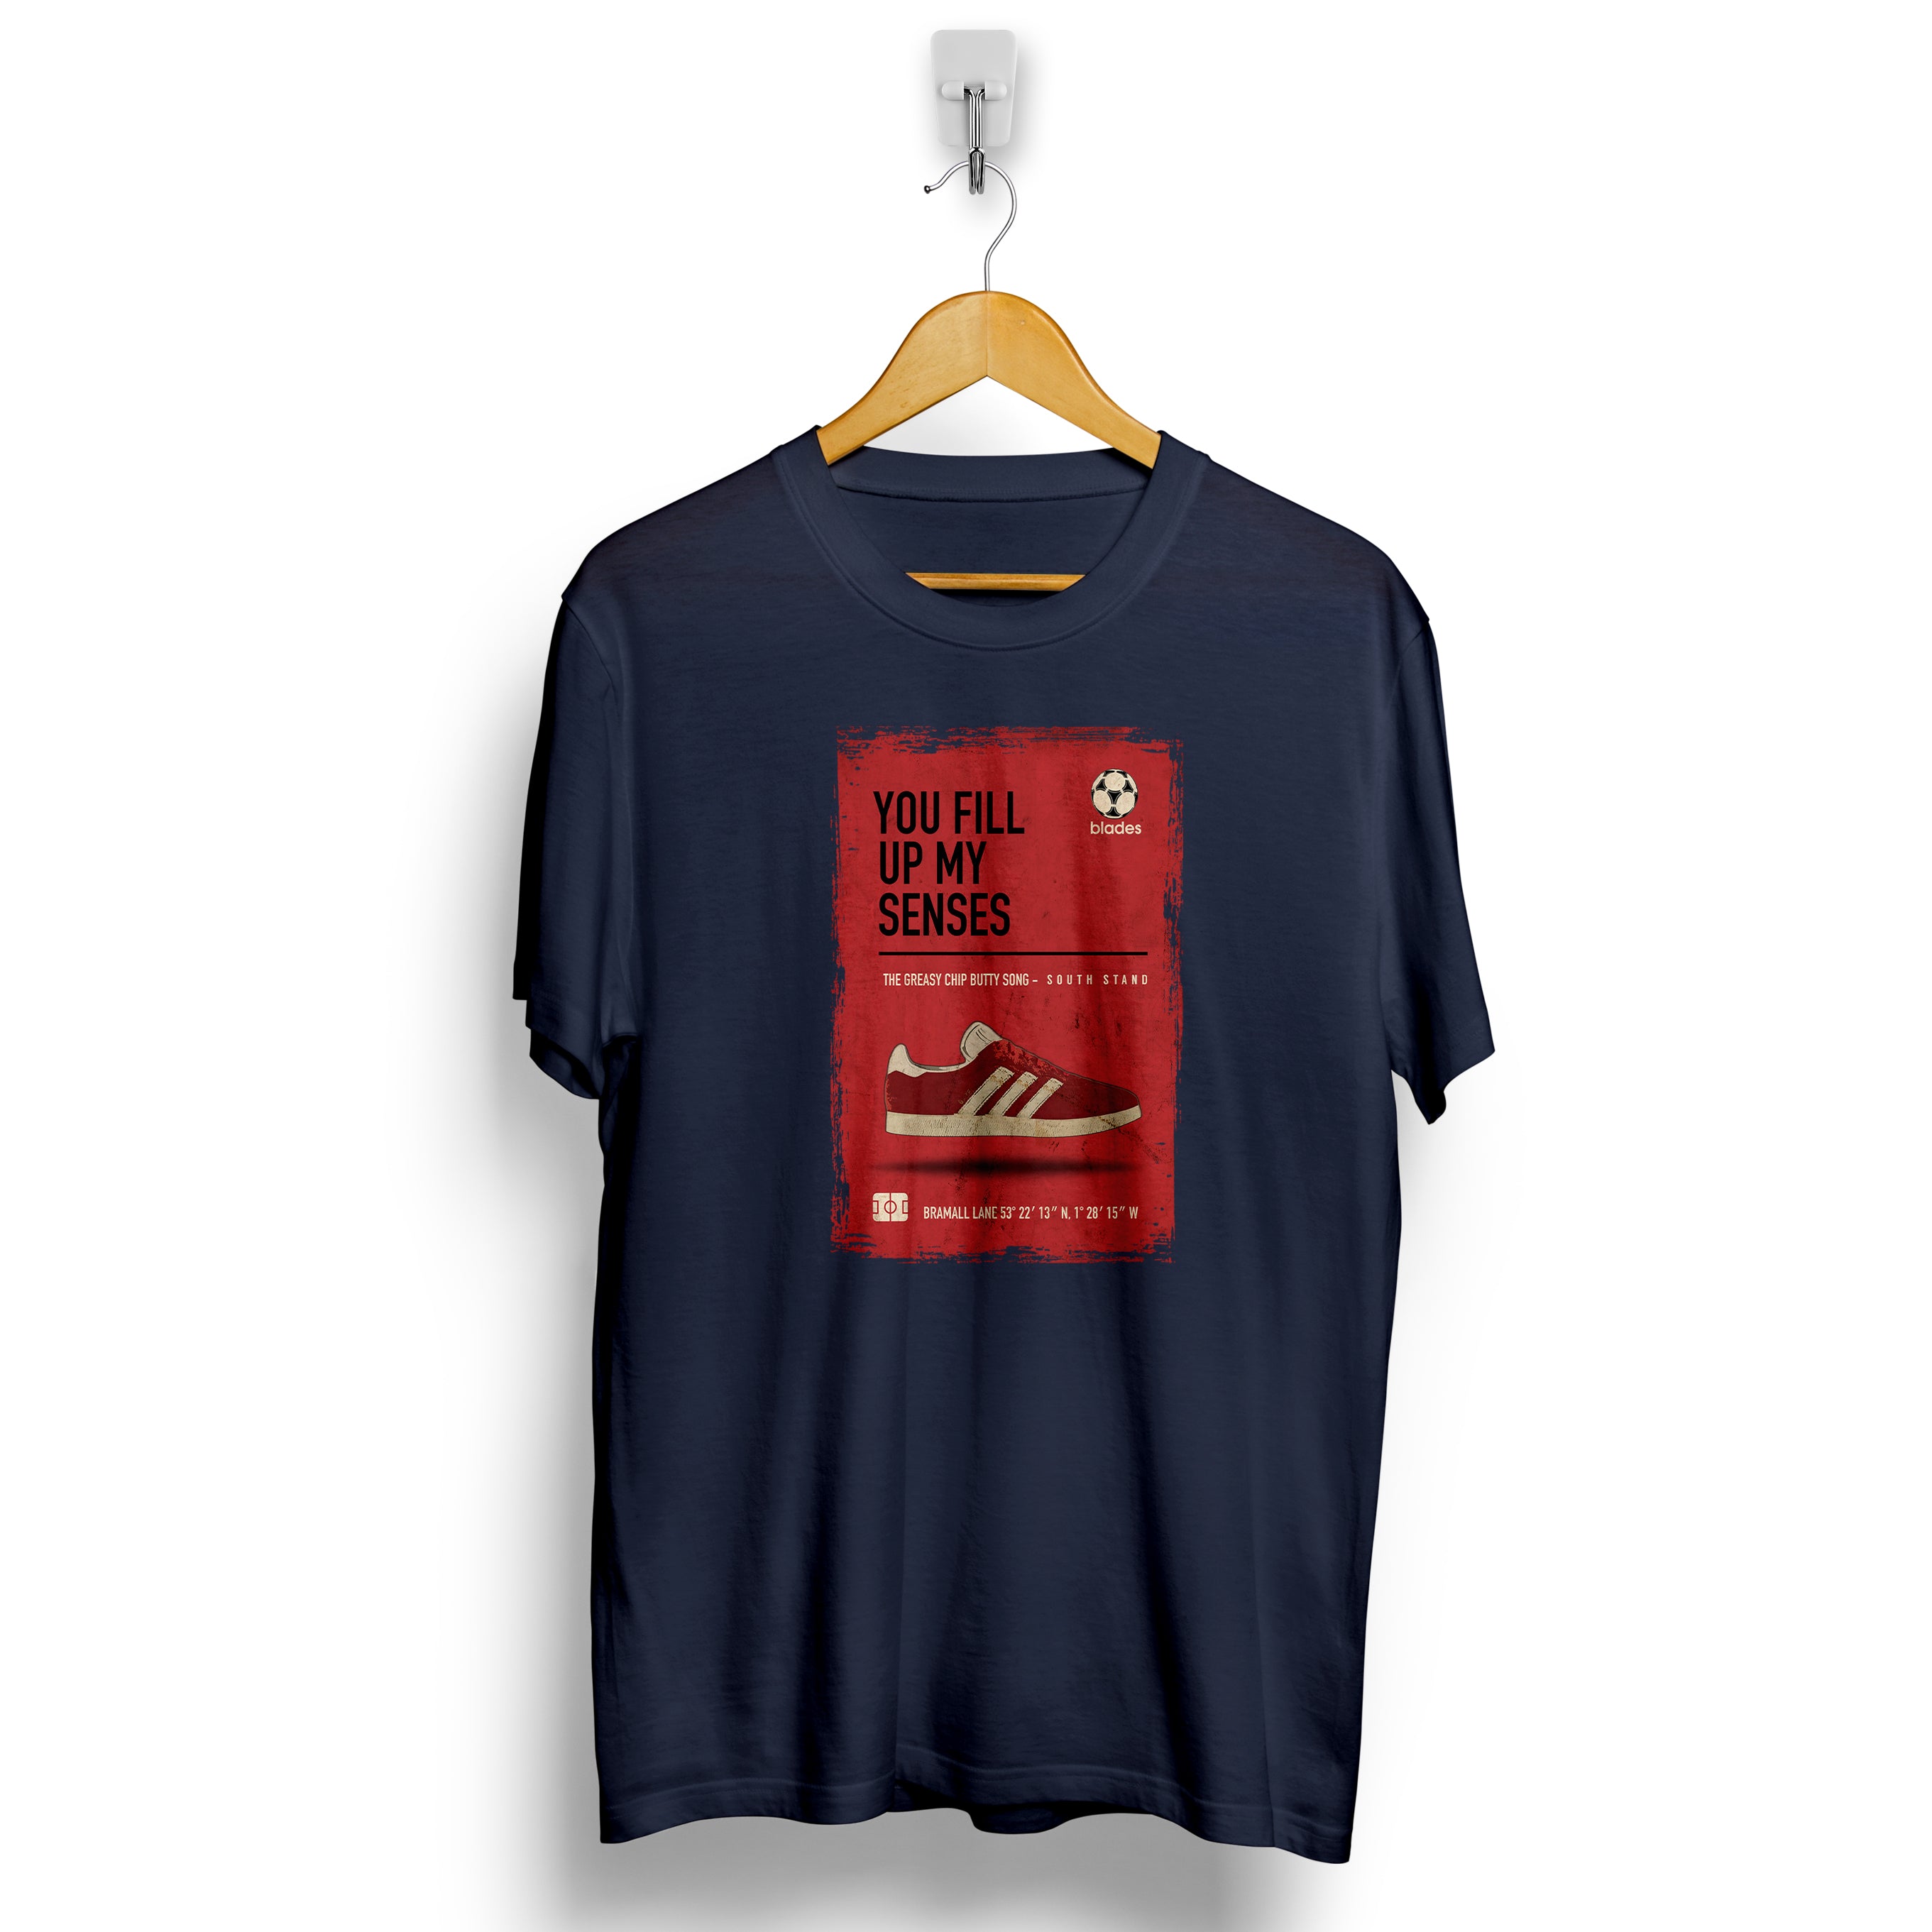 Sheffield Greasy Chip Butty Football Casuals T Shirt.